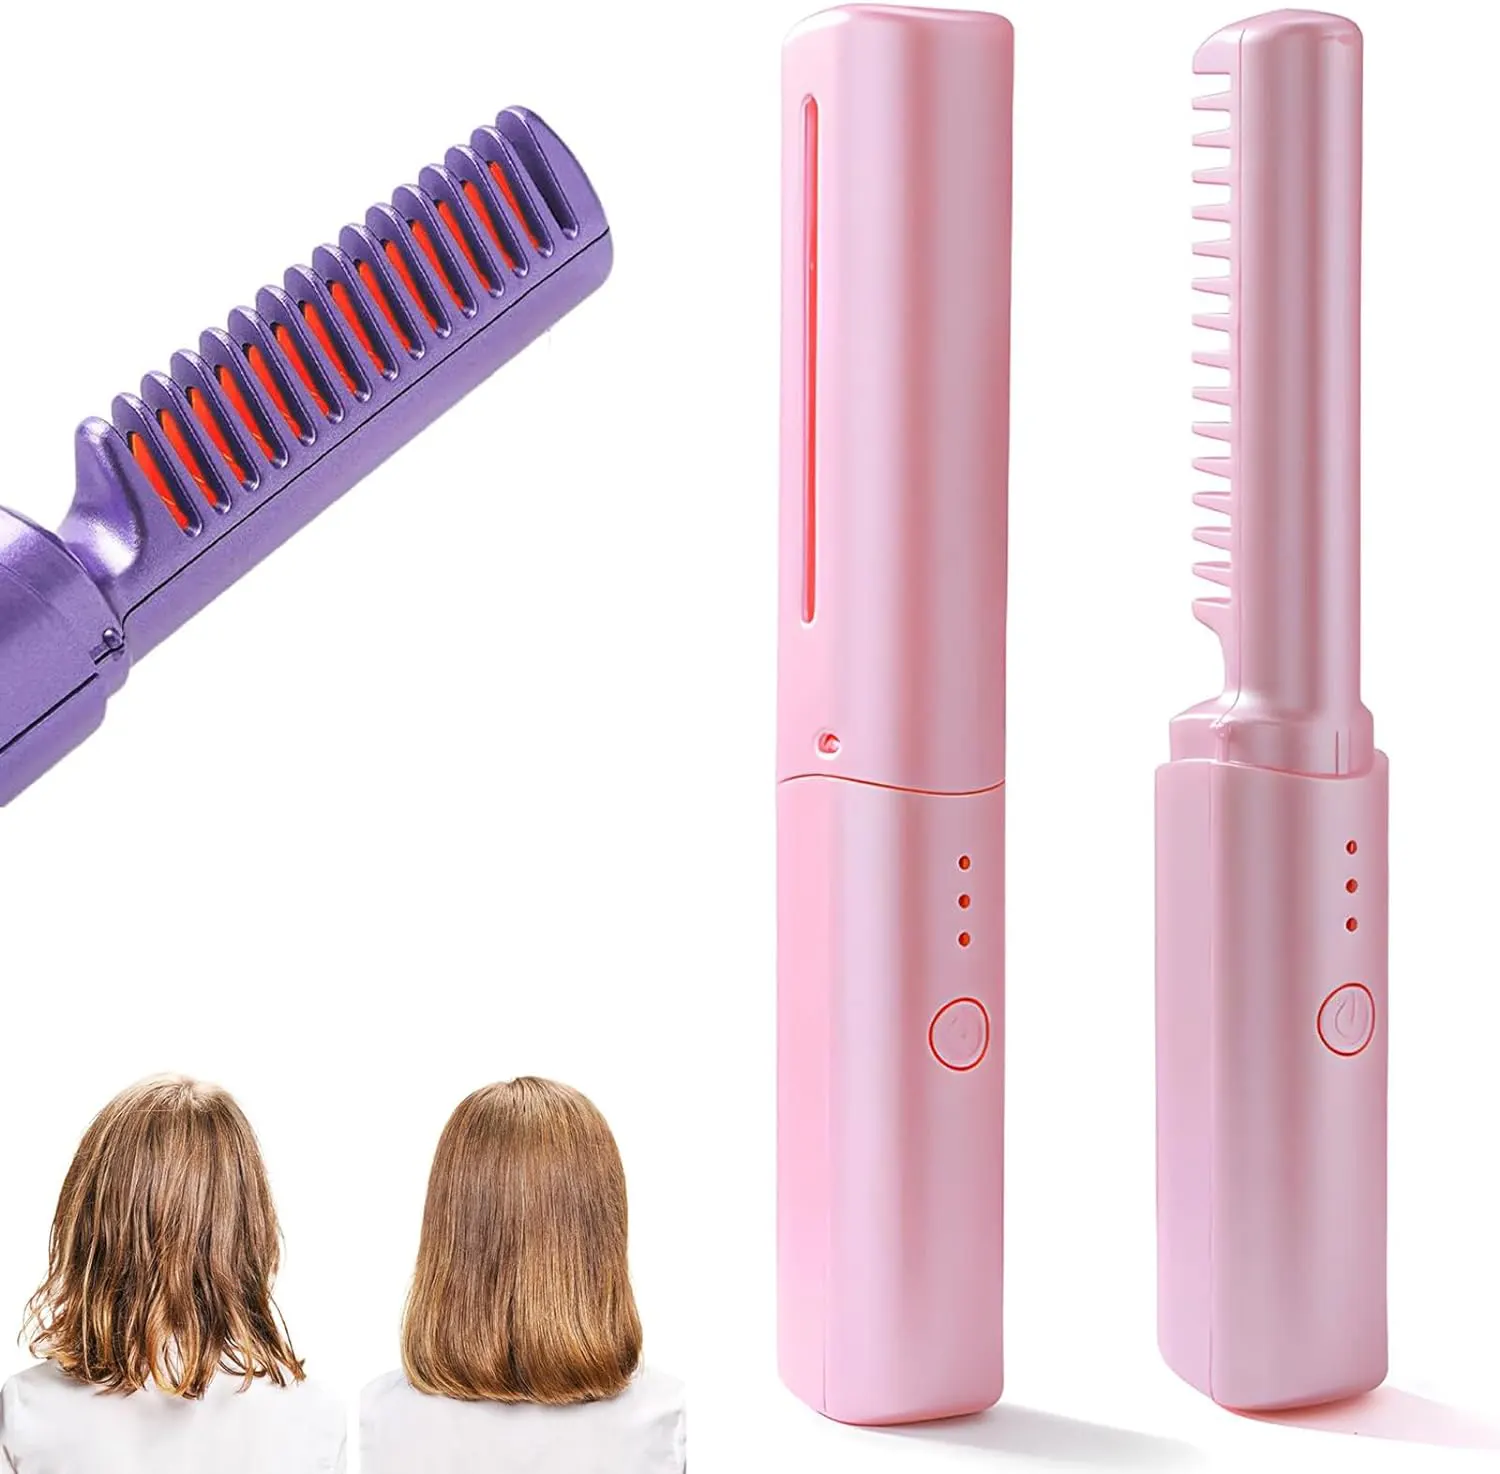 Rechargeable electronic hair straightening comb, pink, 146